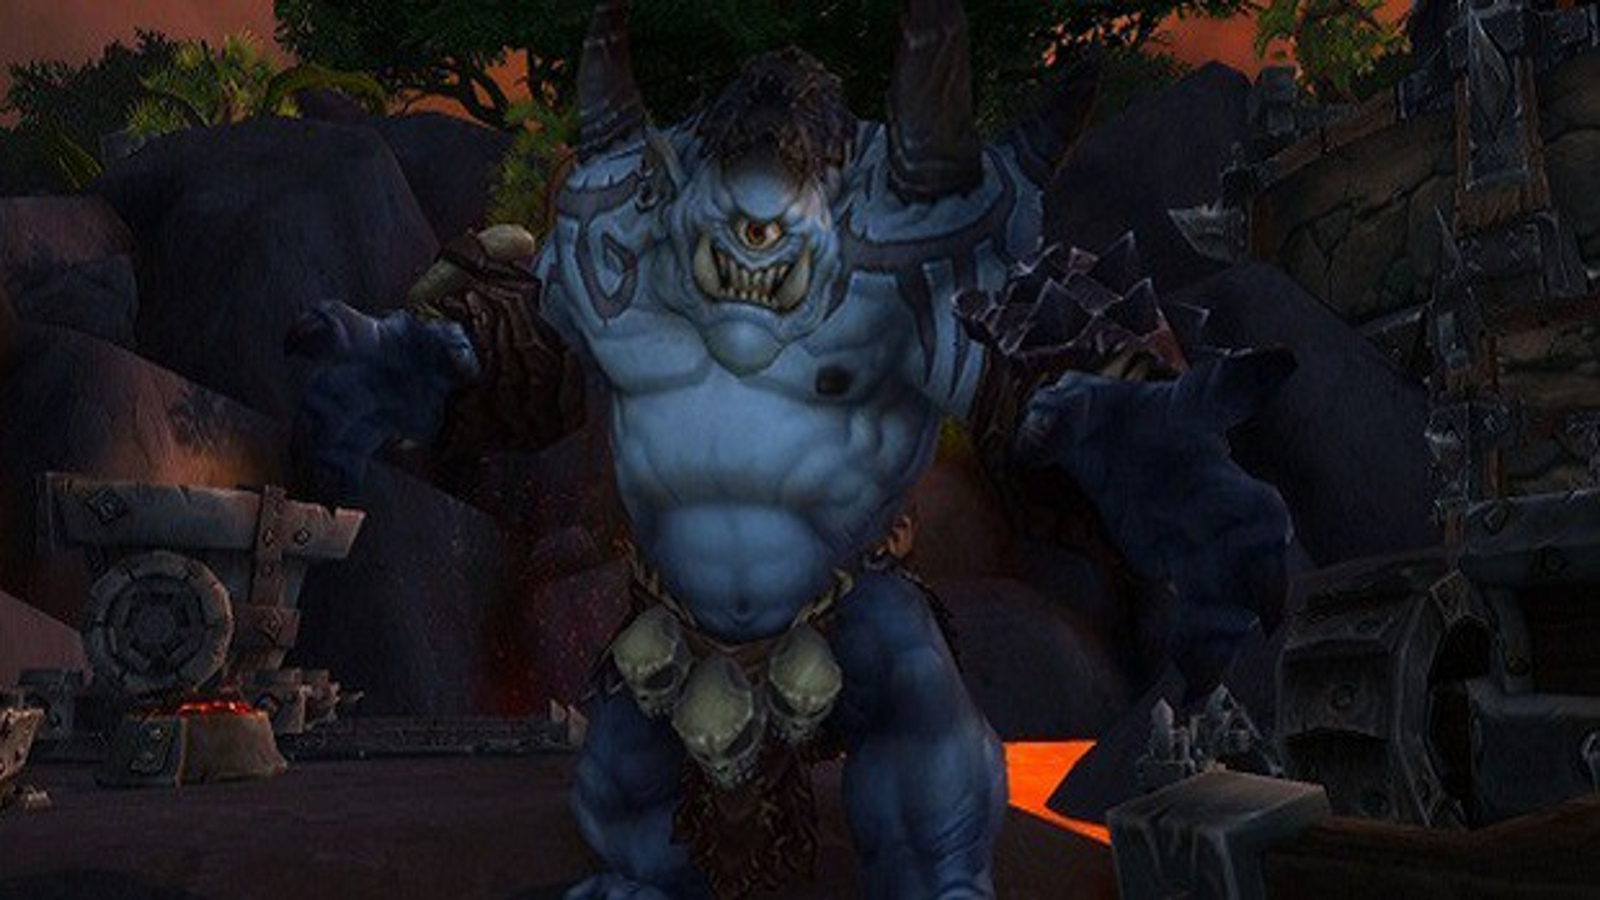 Could World of Warcraft come to Xbox? The MMO's executive producer